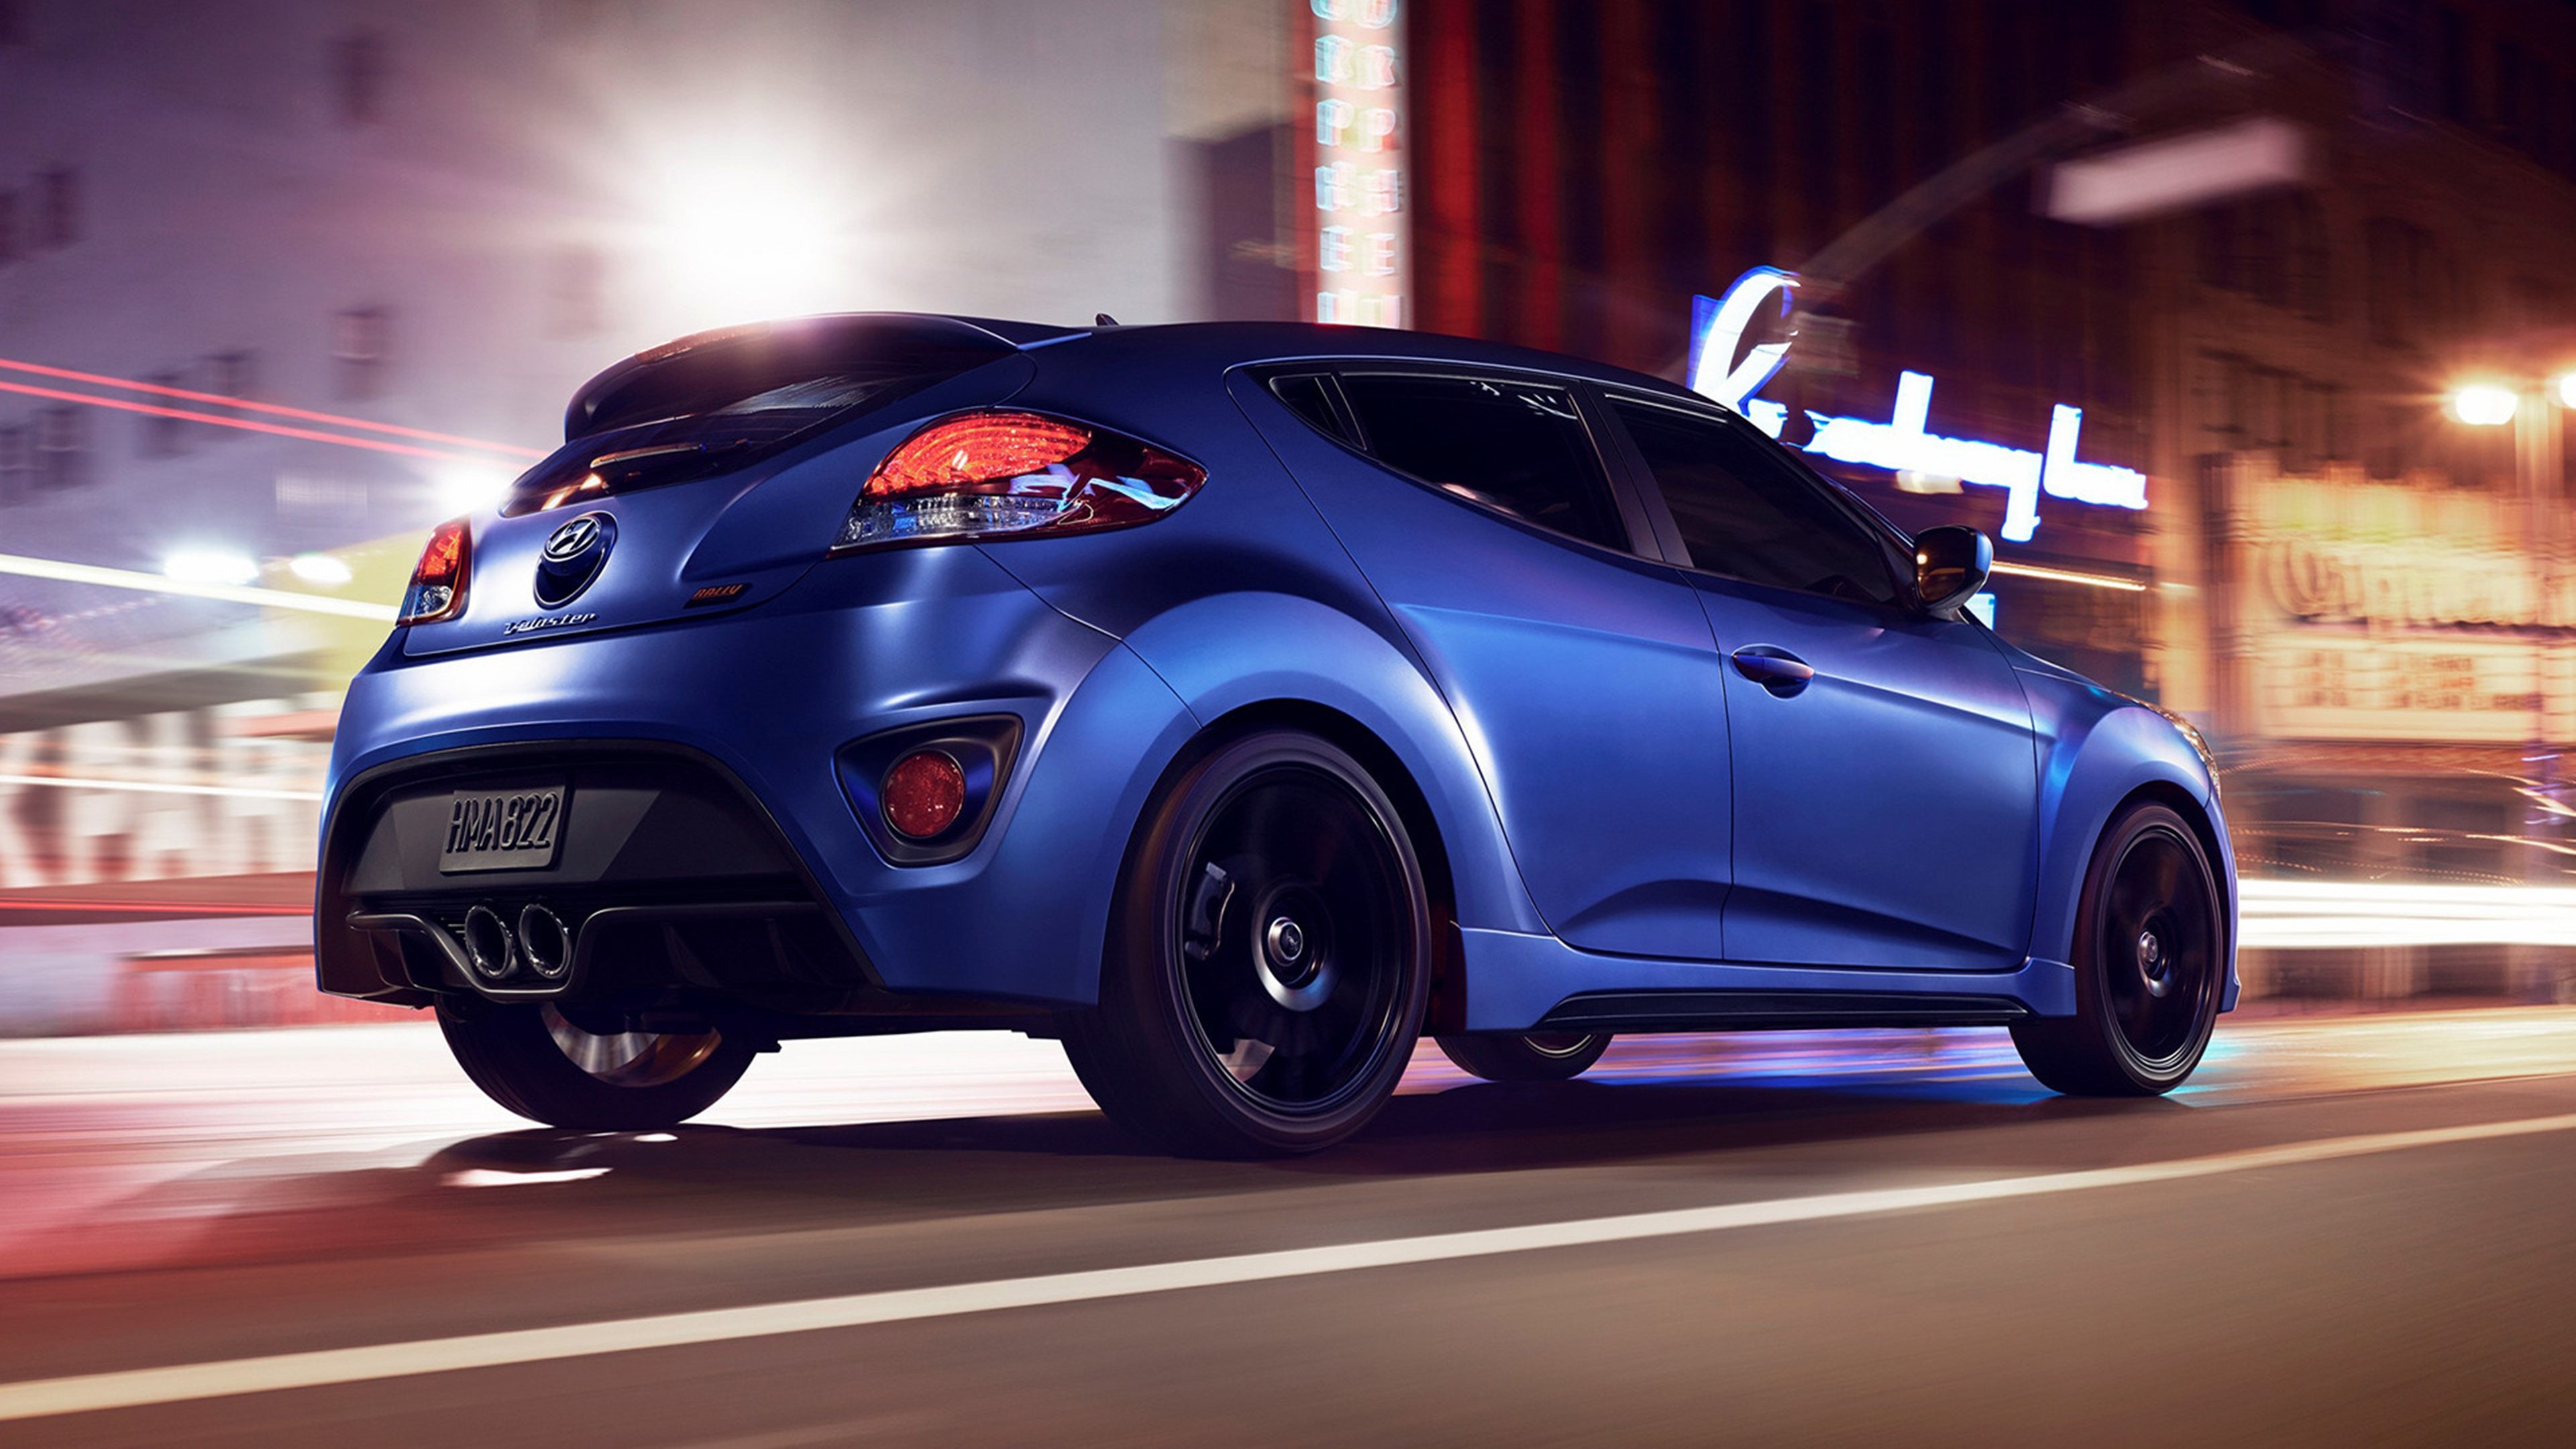 2016, Hyundai, Veloster, Rally, Edition, Blue, New, Cars, Speed, Motors, Streets Wallpaper